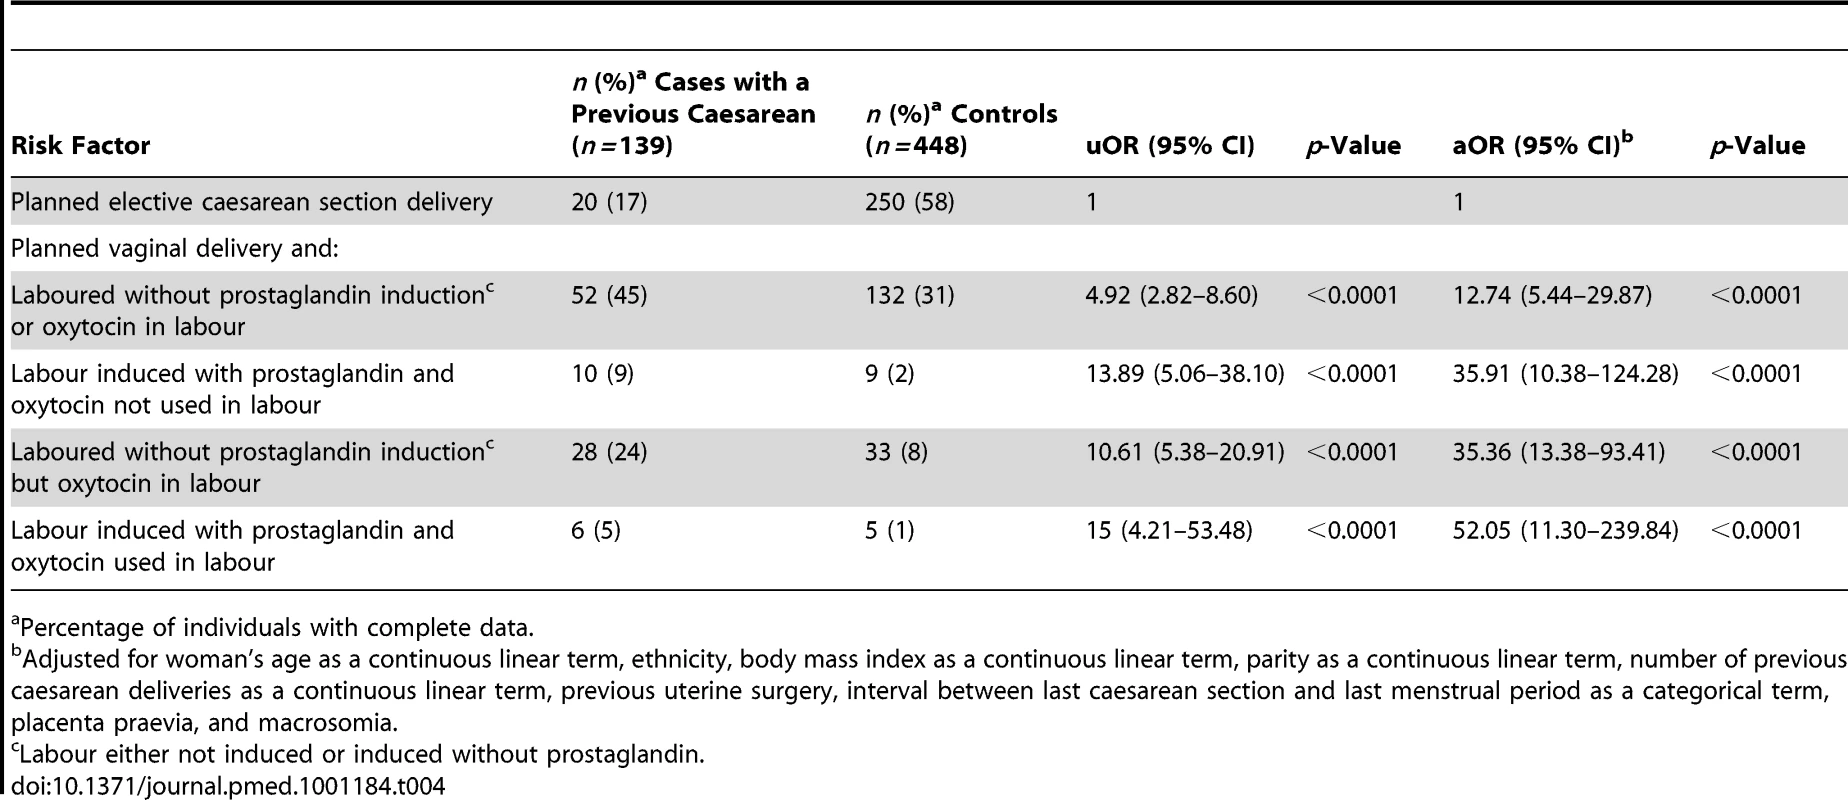 Risk factors for uterine rupture in women with prior delivery by caesarean section.